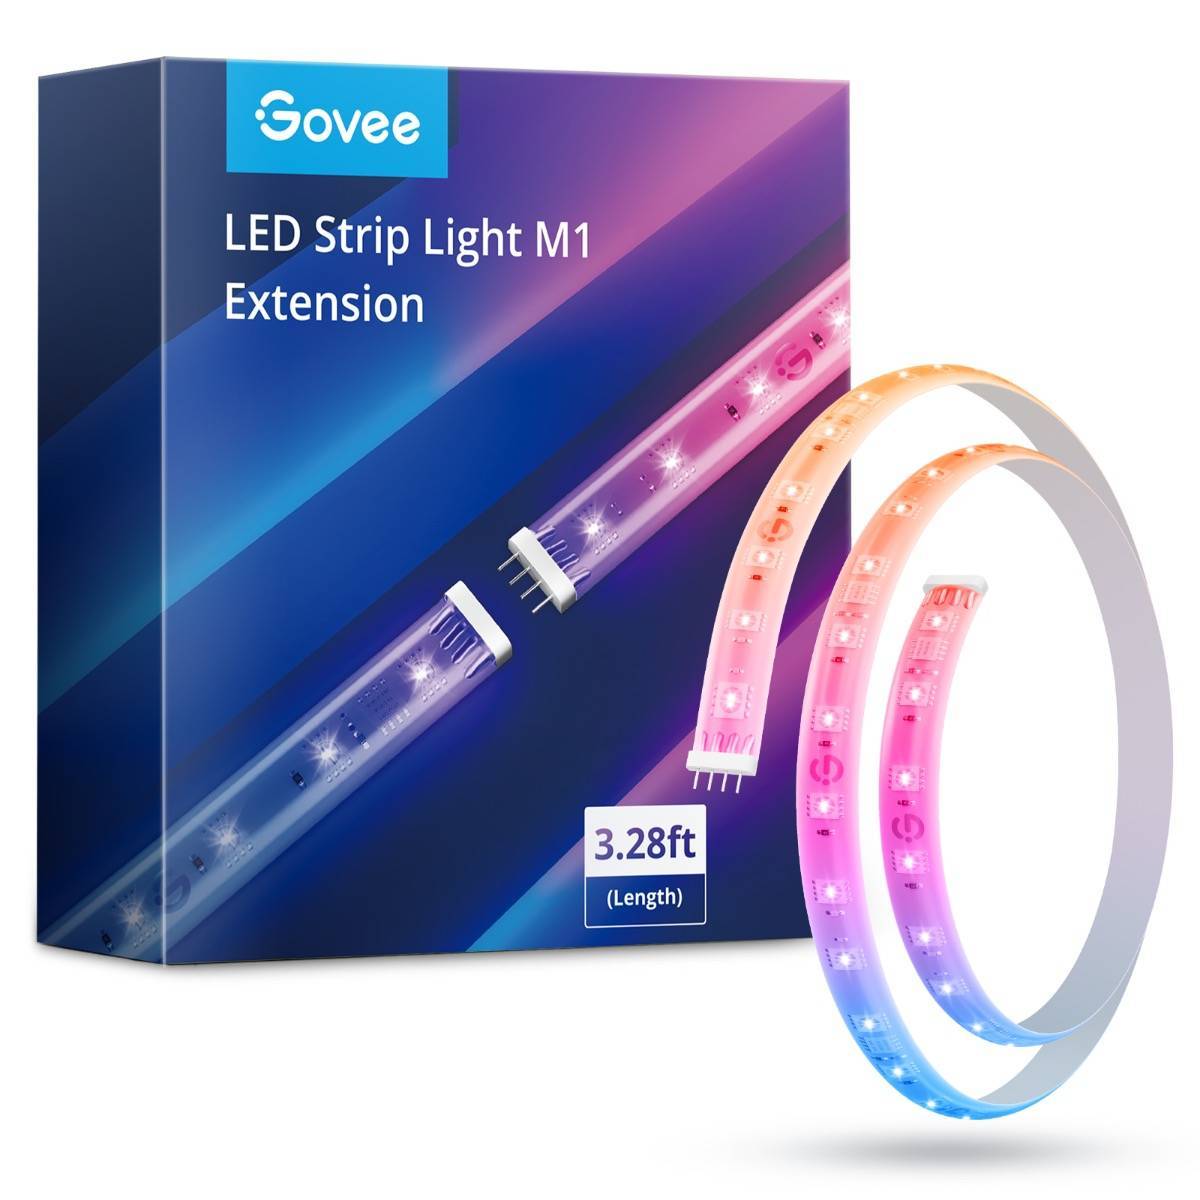 Govee RGBICW LED Strip Lights 1m Extension (for H61E1